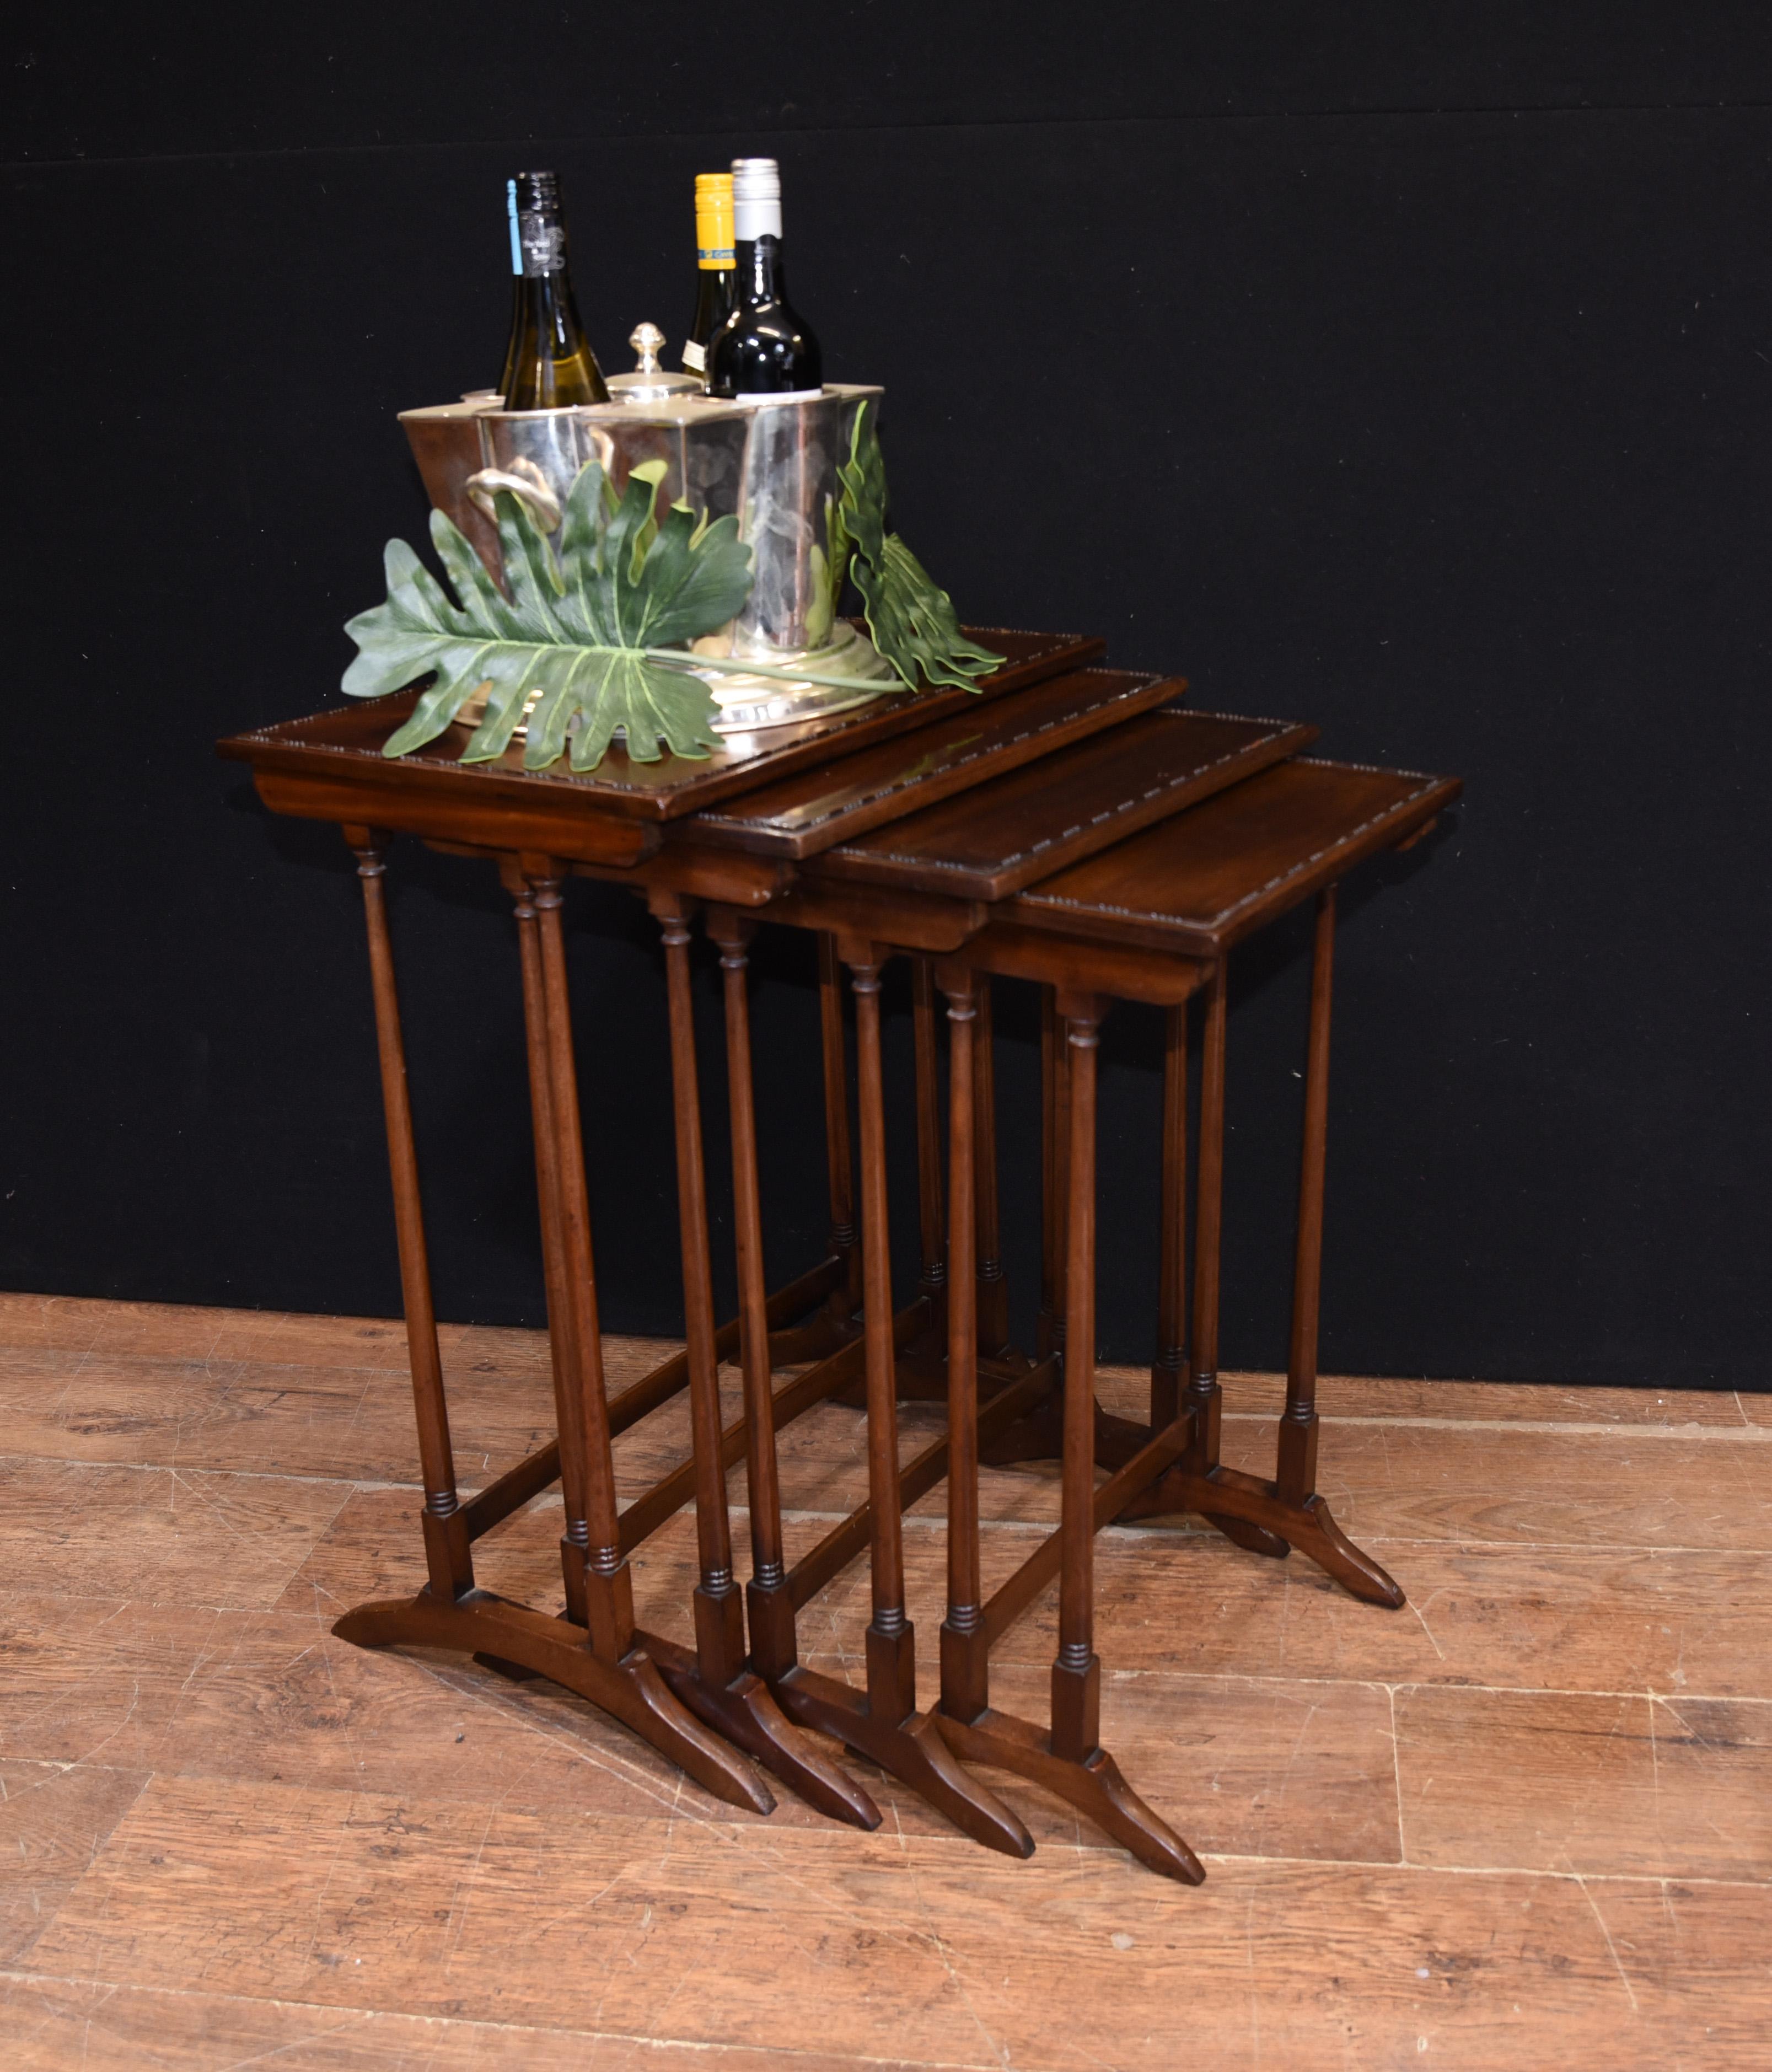 - Gorgeous Regency nest of tables in mahogany
- Set of four with carved borders
- Very practical piece of English furniture, great for dinner and drinks parties
- Viewings available by appointment
- Offered in great shape ready for home use